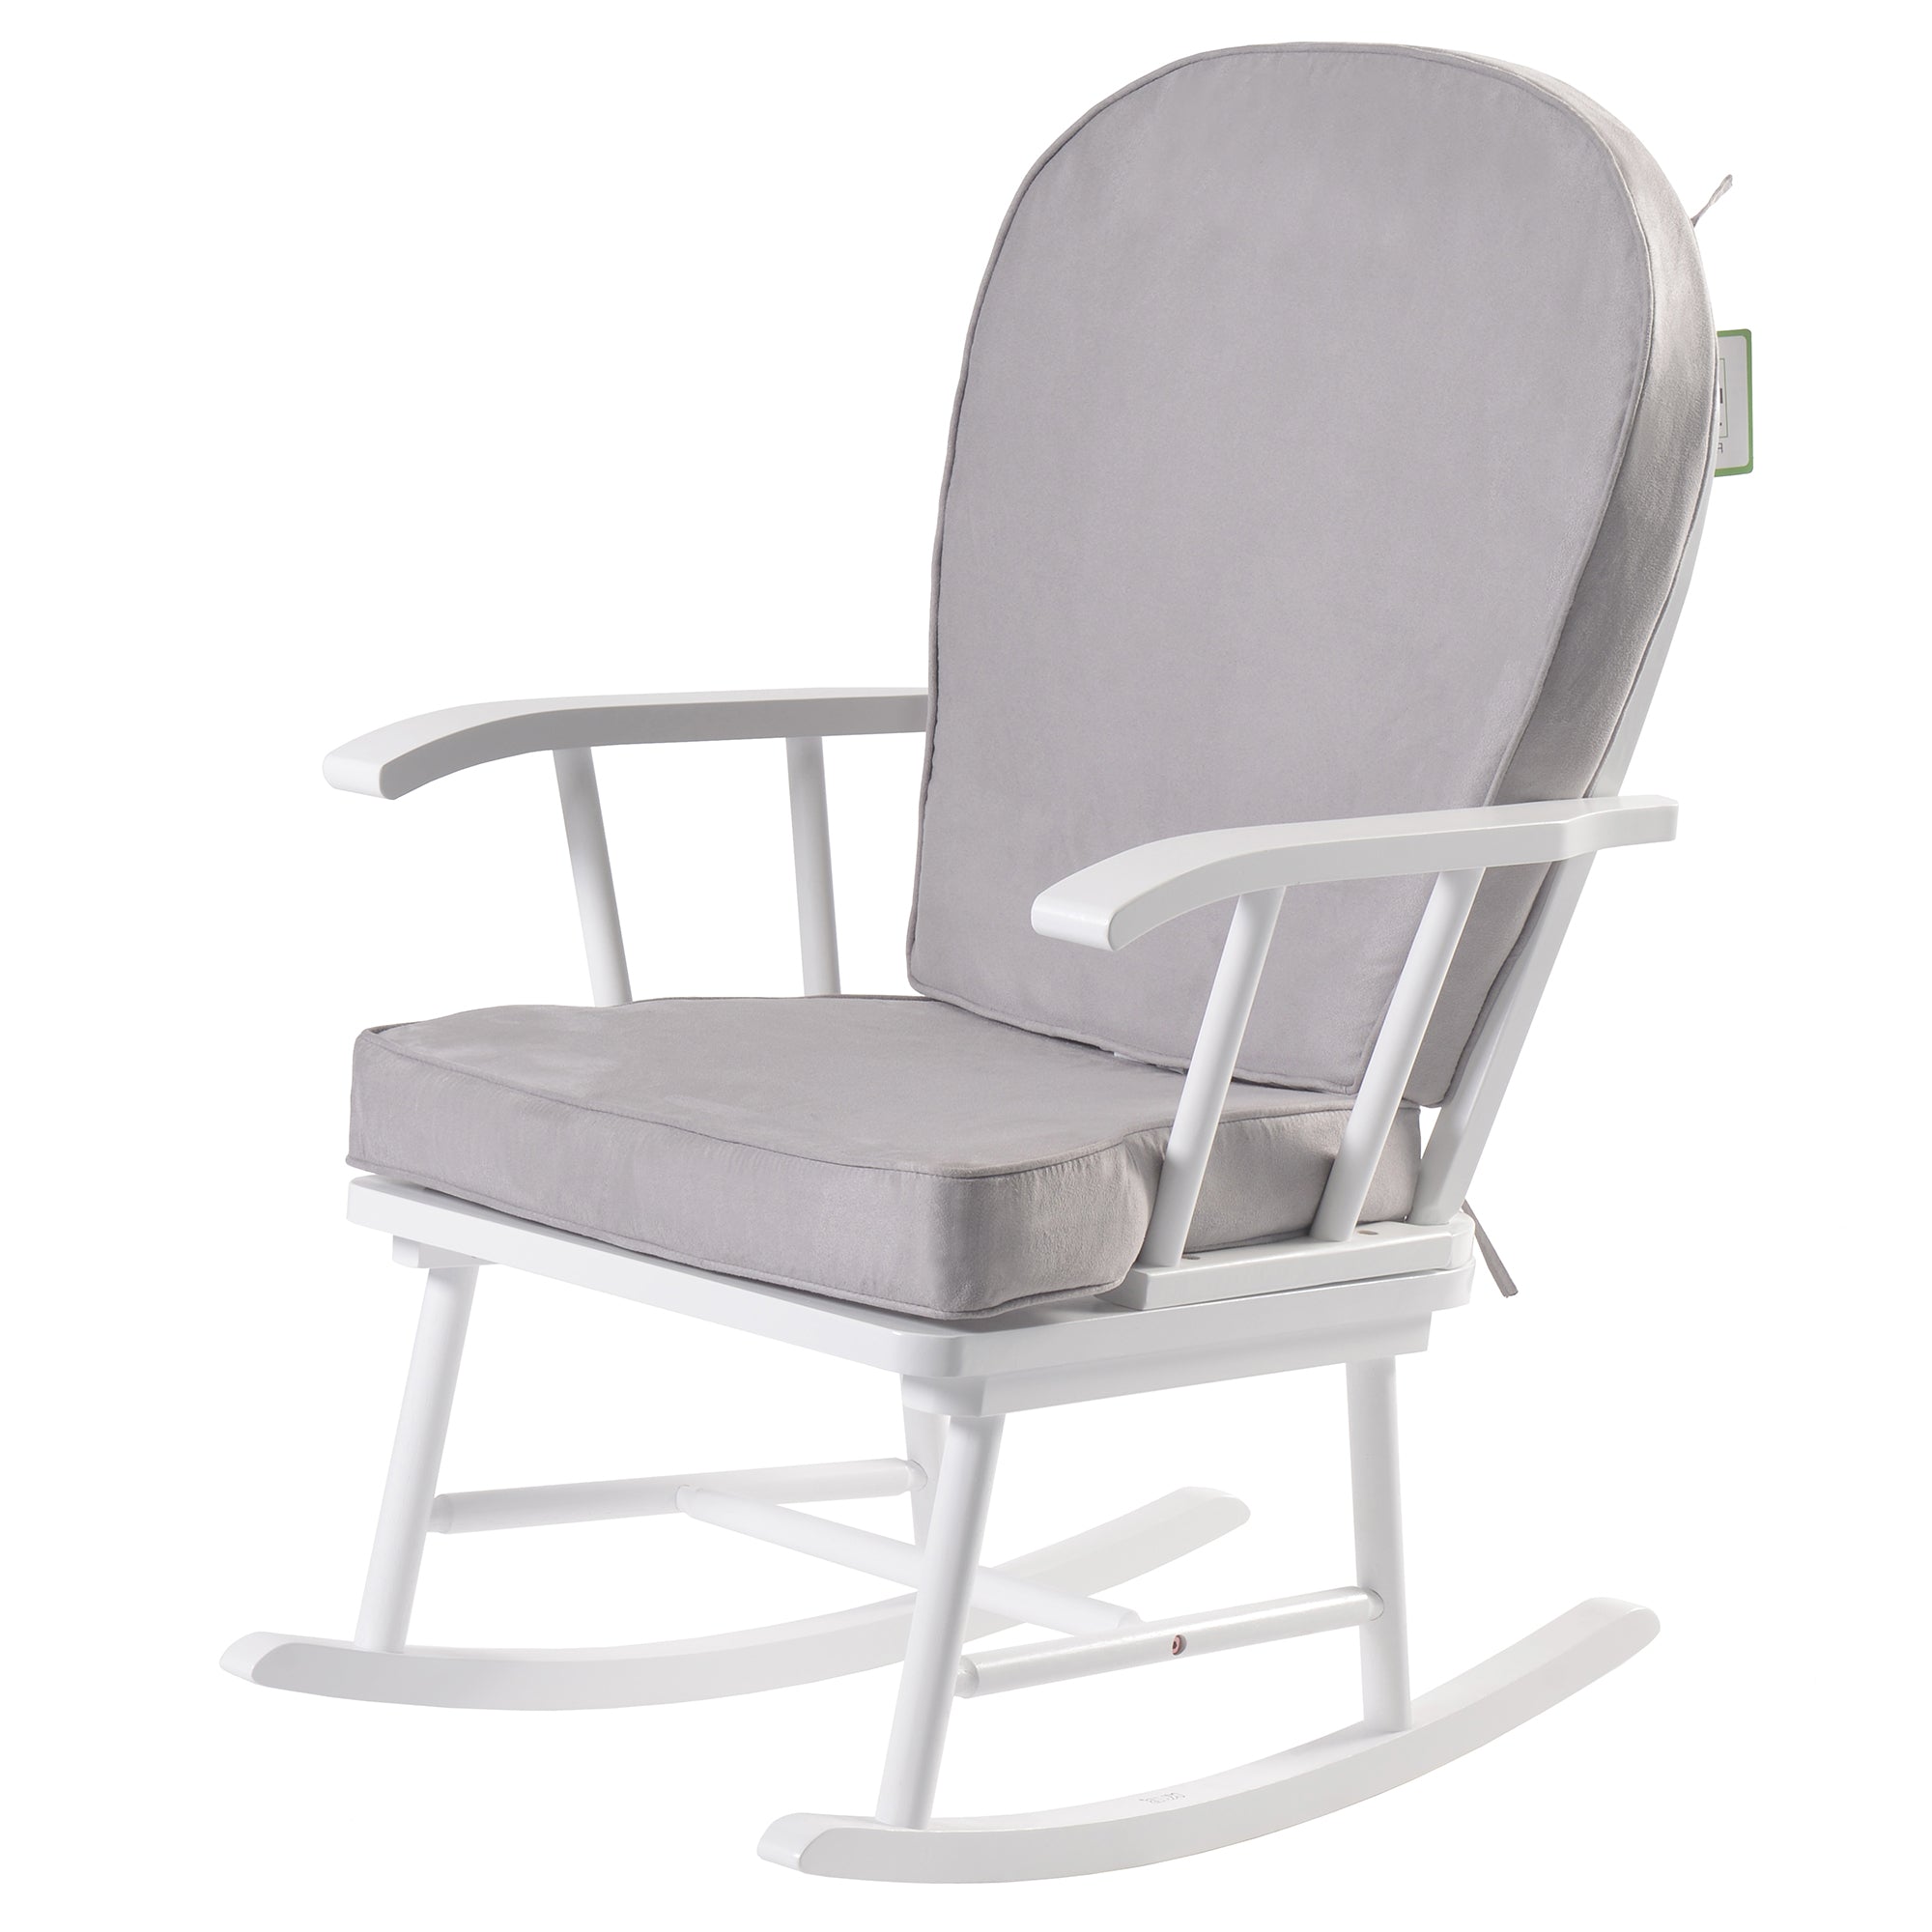 Hart Nursing Rocking Chair - 15% OFF Applied at Checkout